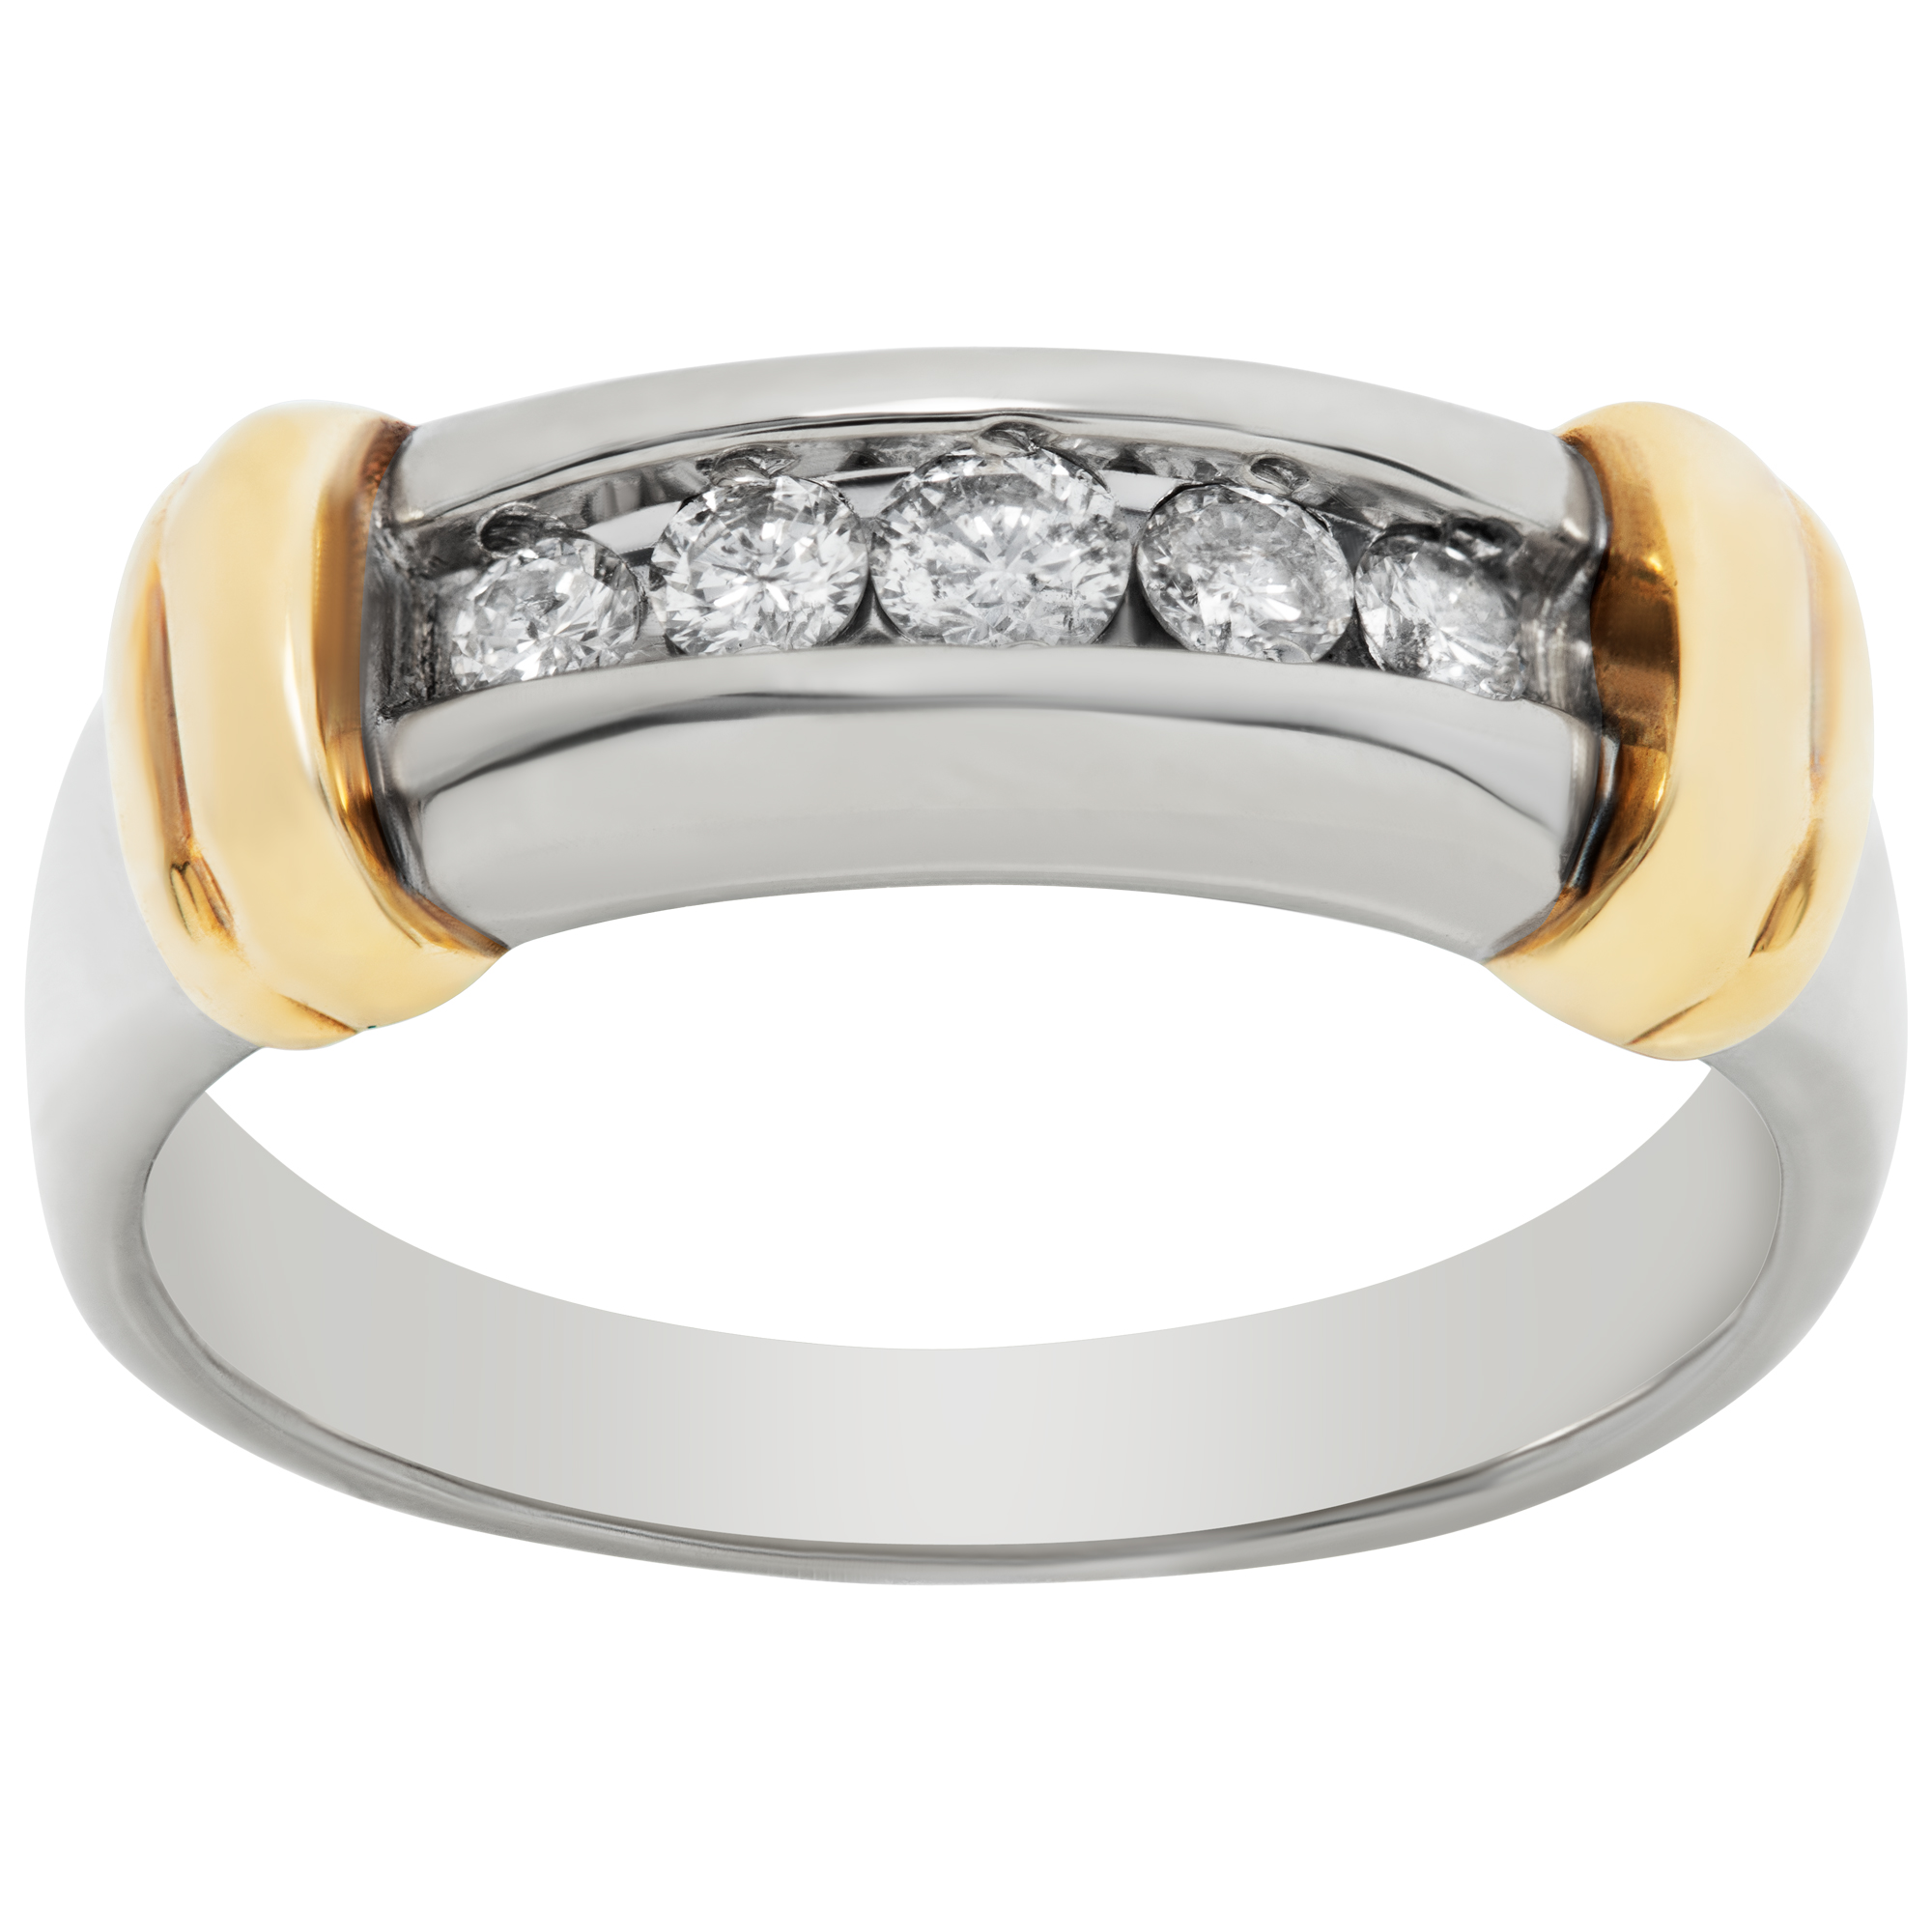 Diamond band in 18k white and yellow gold. image 1